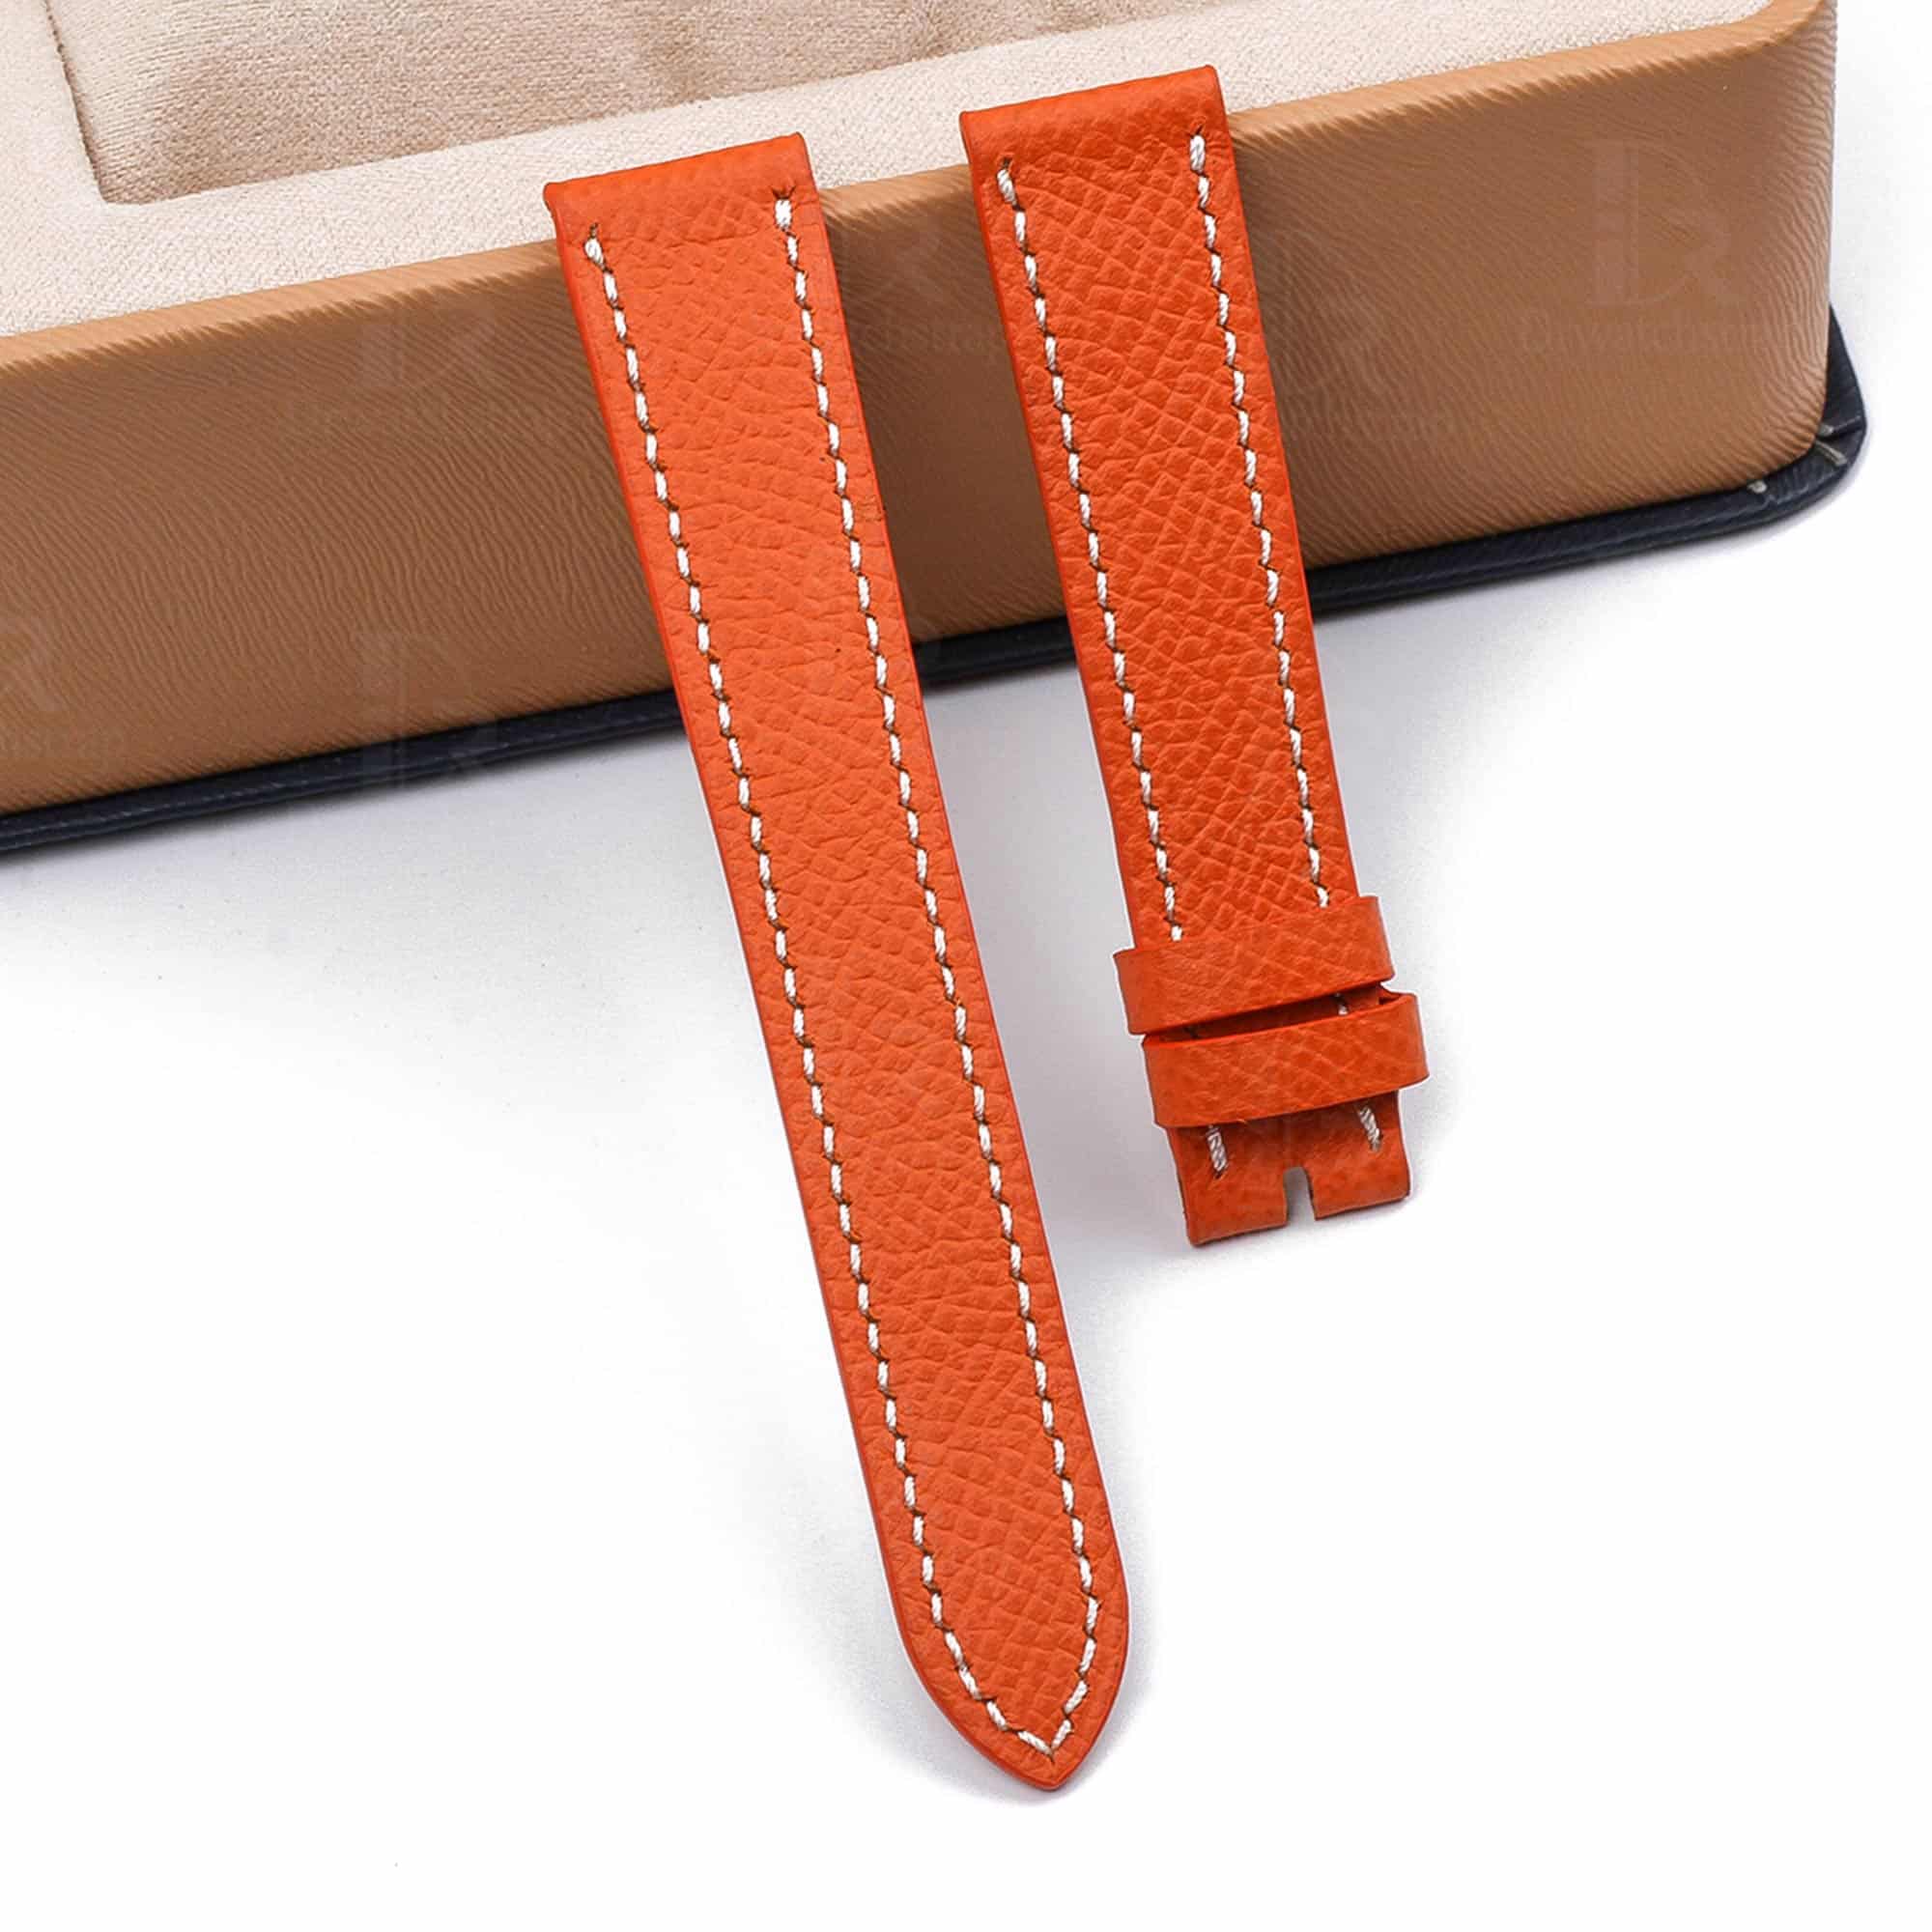 Premium high-quality Epsom orange calfskin leather Hermes watch band and strap for Hermes Heure H Cape Cod luxury watch - orange sport band - Shop Single tour watch bands online for sale at low price